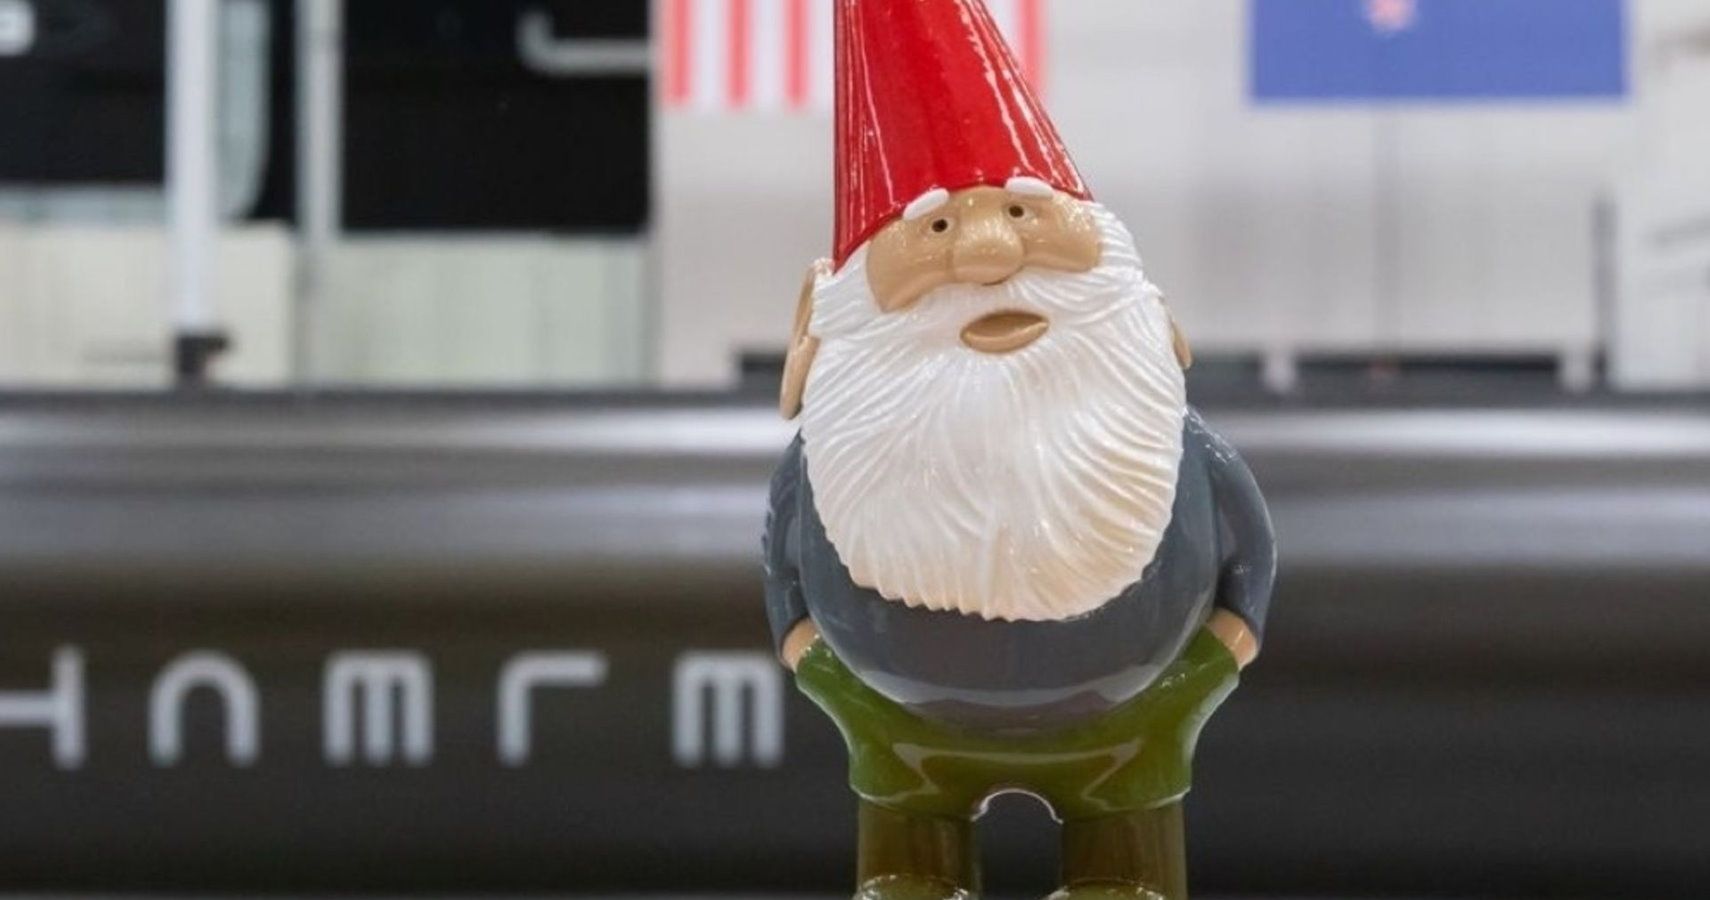 Gabe Newell Is About To Launch A Replica Of Gnome Chompski Into Space